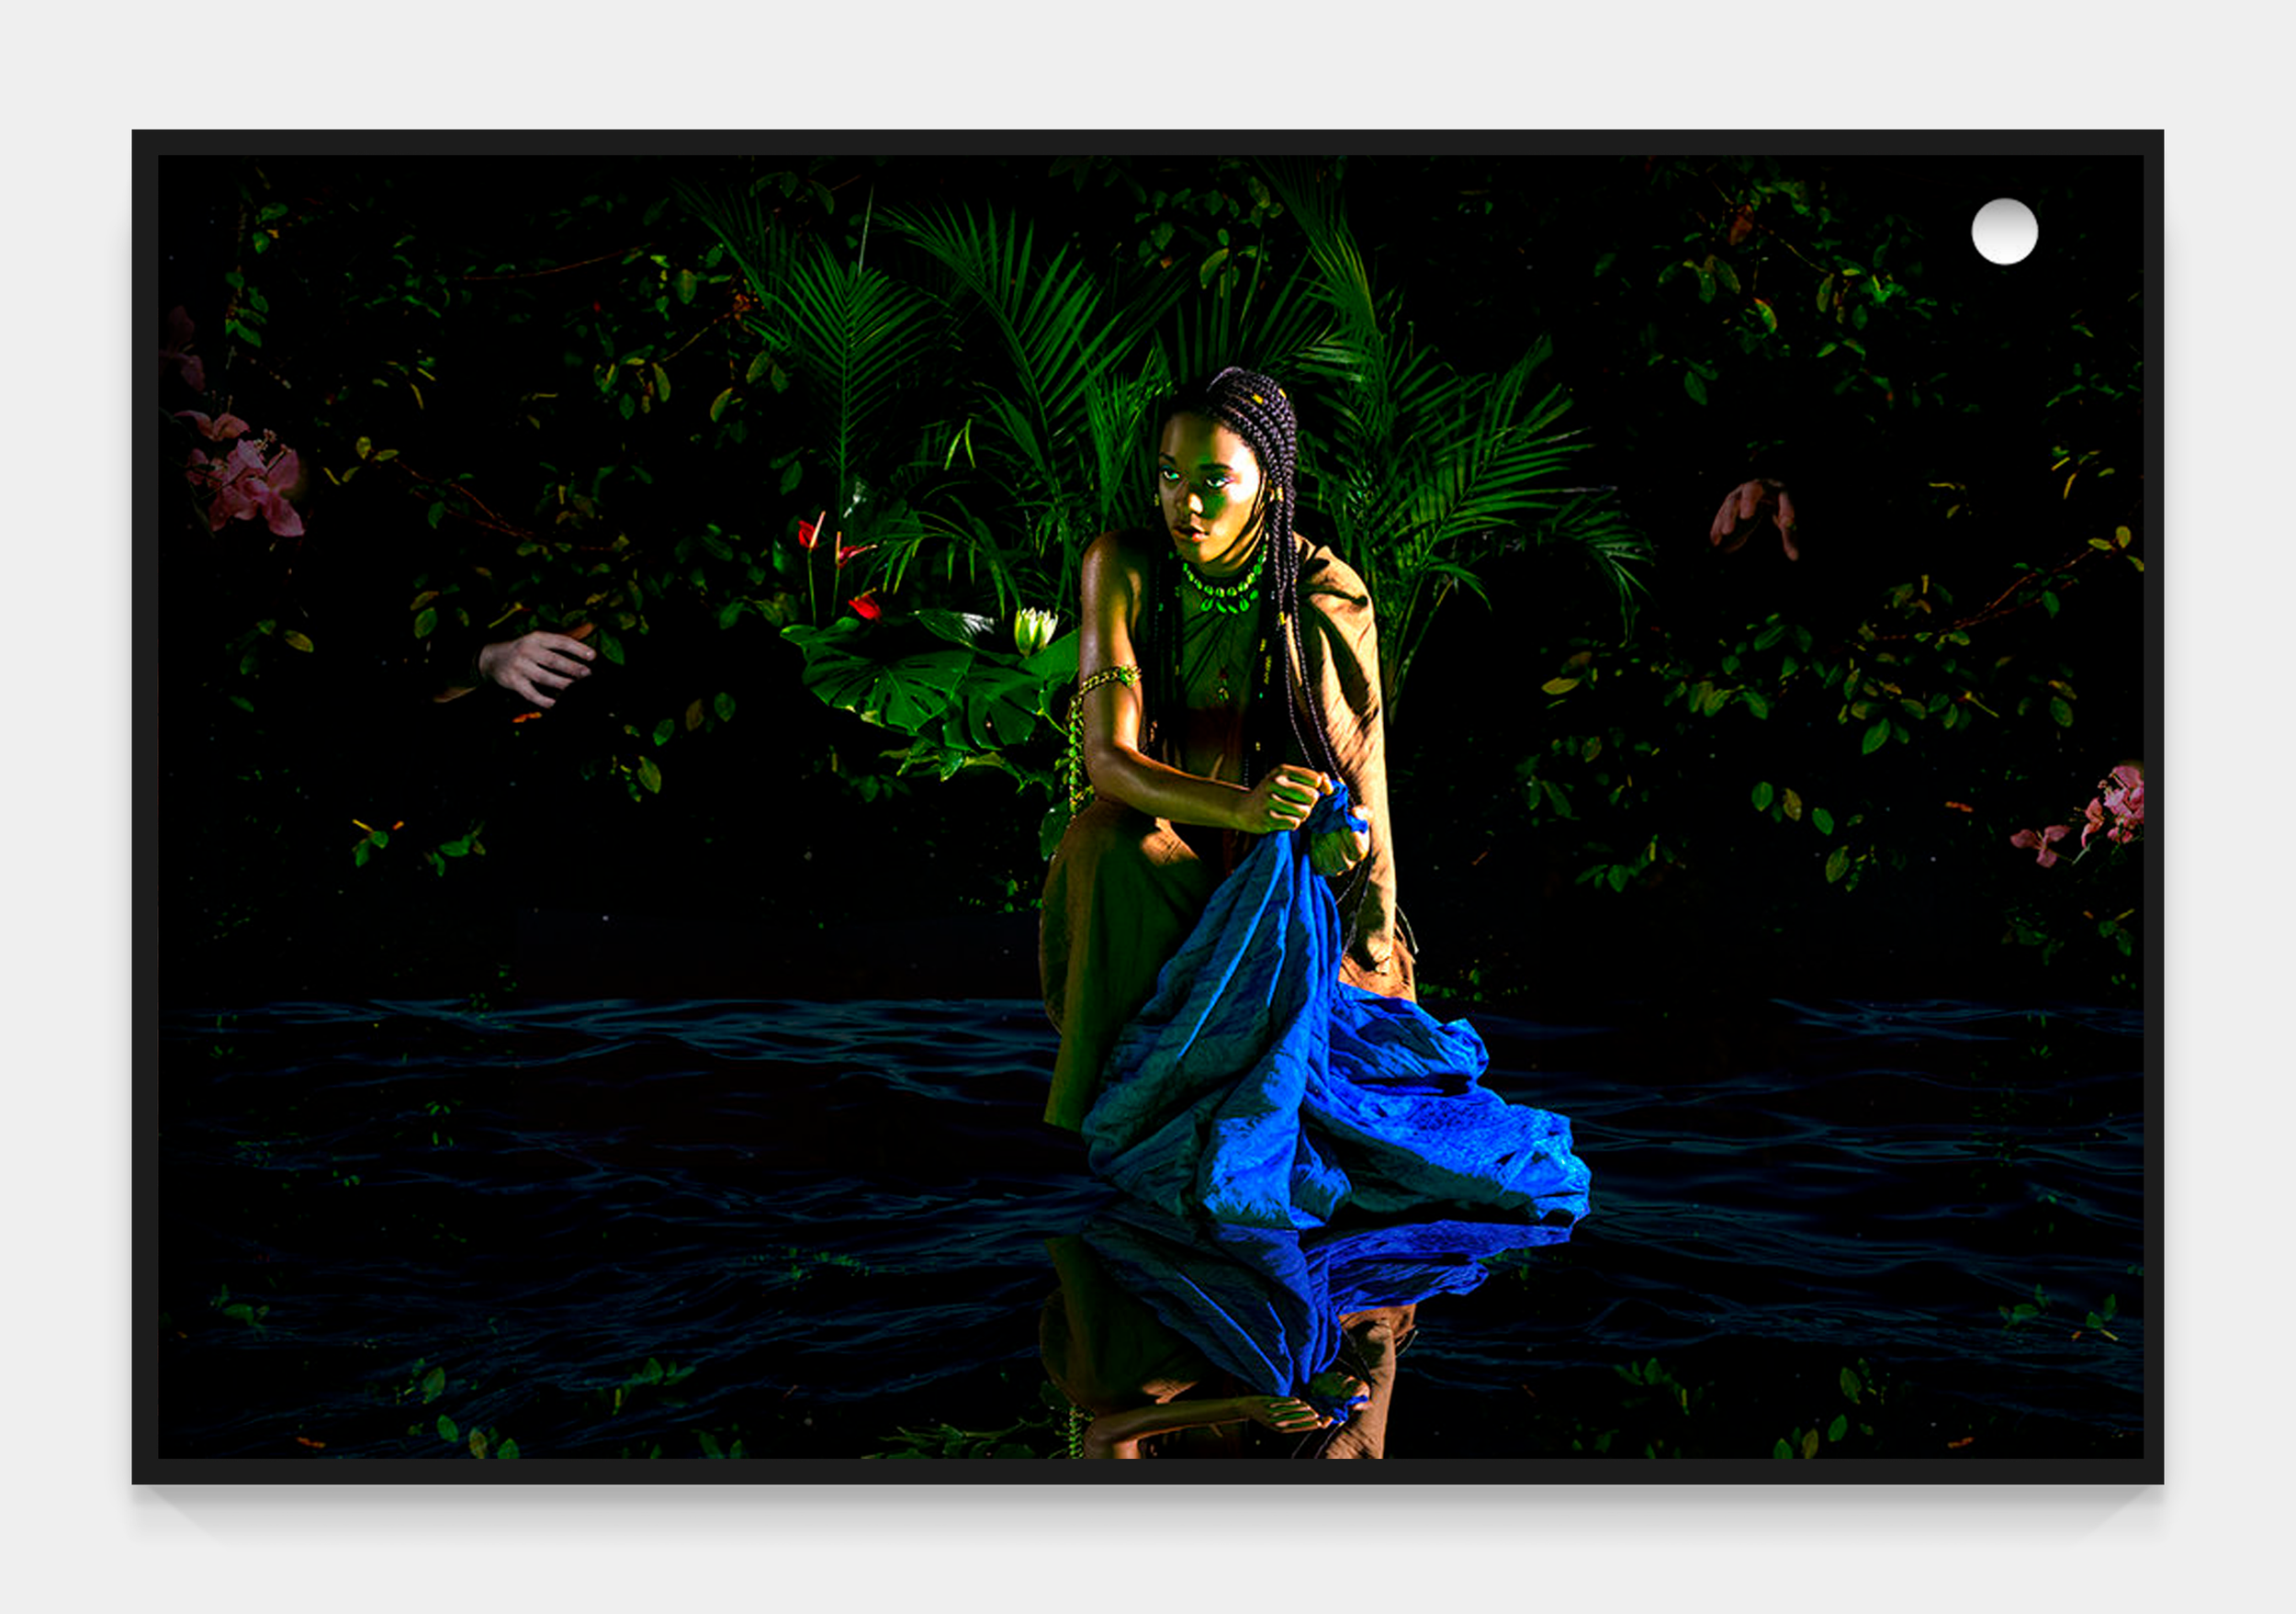  “Untitled (Down by the Spanish River, stained in sugarcane)”, 2017 Digital print, 43 ¹⁄₂ x 58 inches 